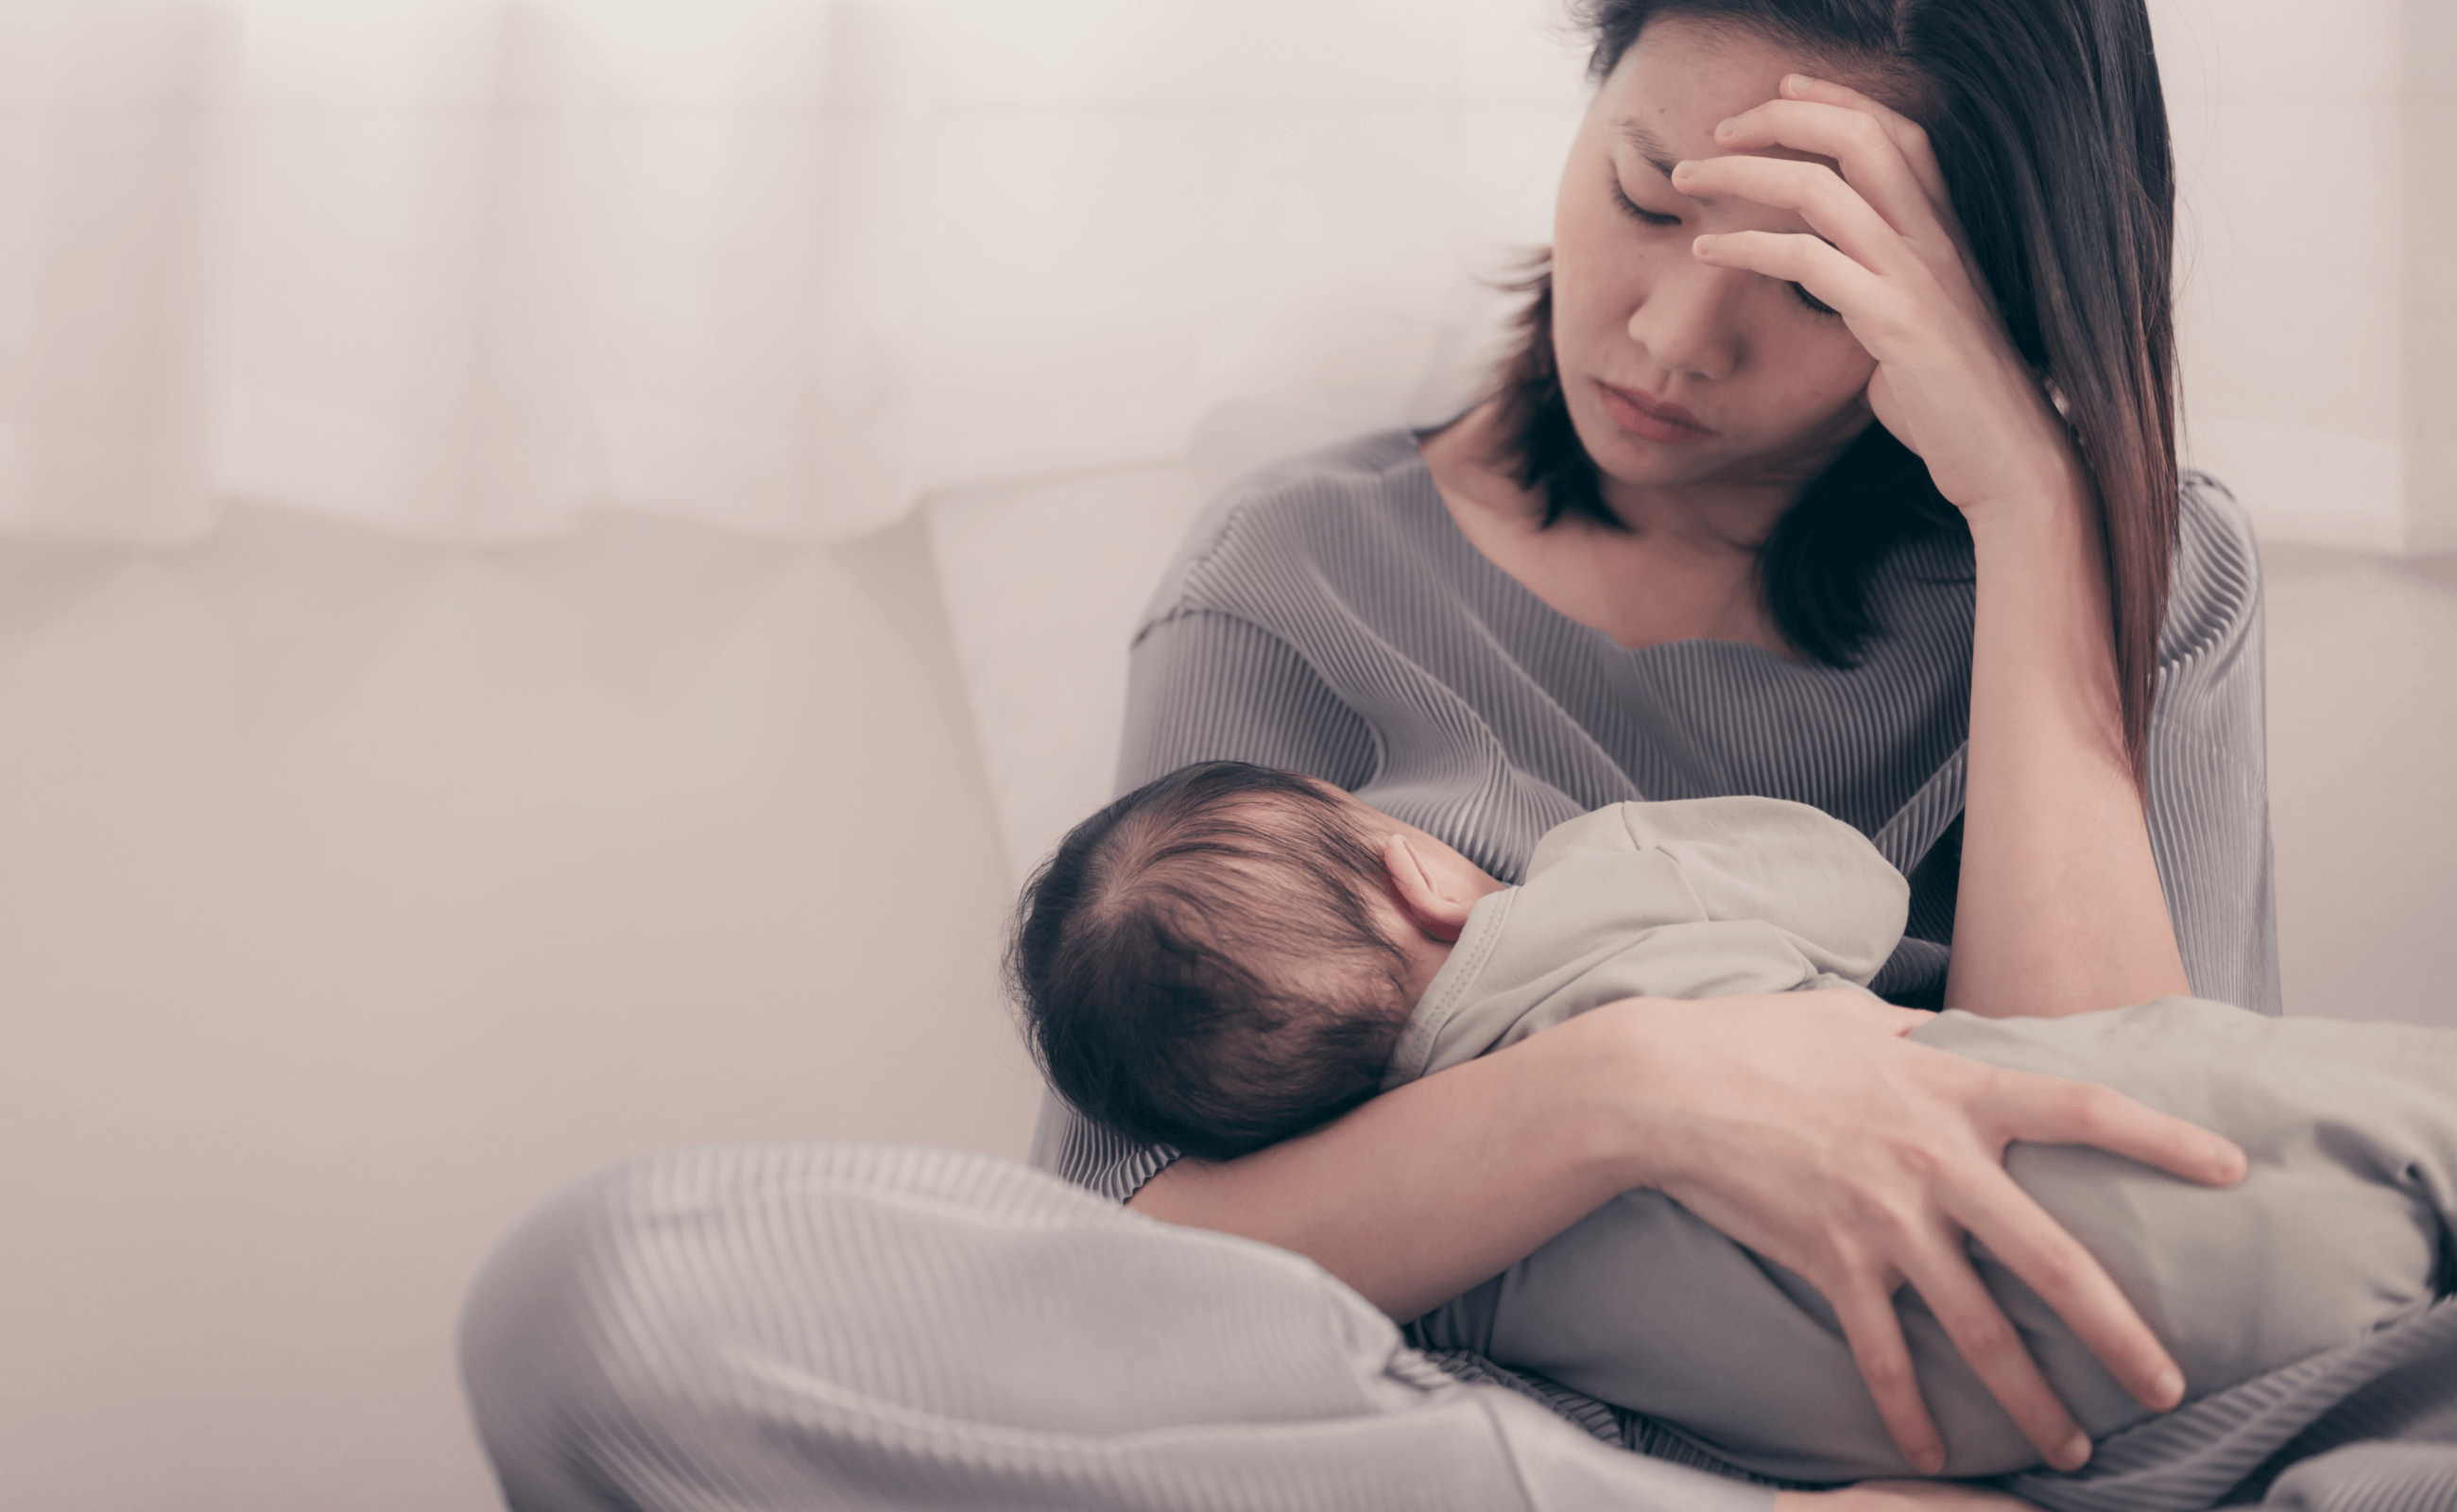 Baby Blues: Supporting a Spouse Through Post-Partum Depression